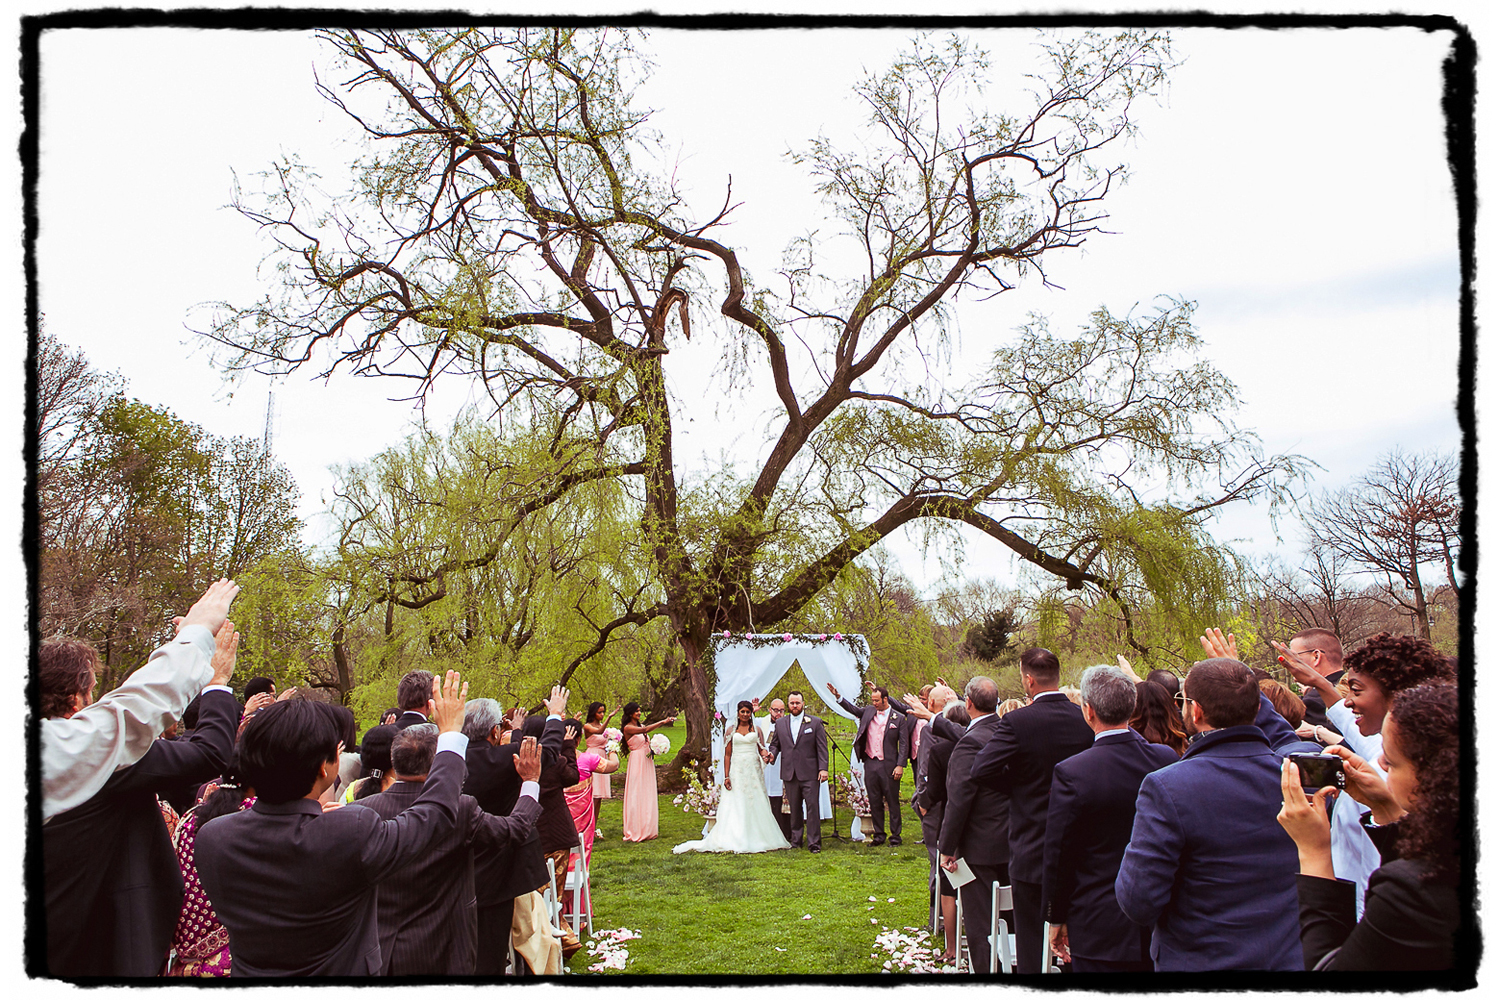 Guests raise their hands as they bless the new marriage under a large willow tree at this April wedding at the Palm House at Brooklyn Botanic Garden.